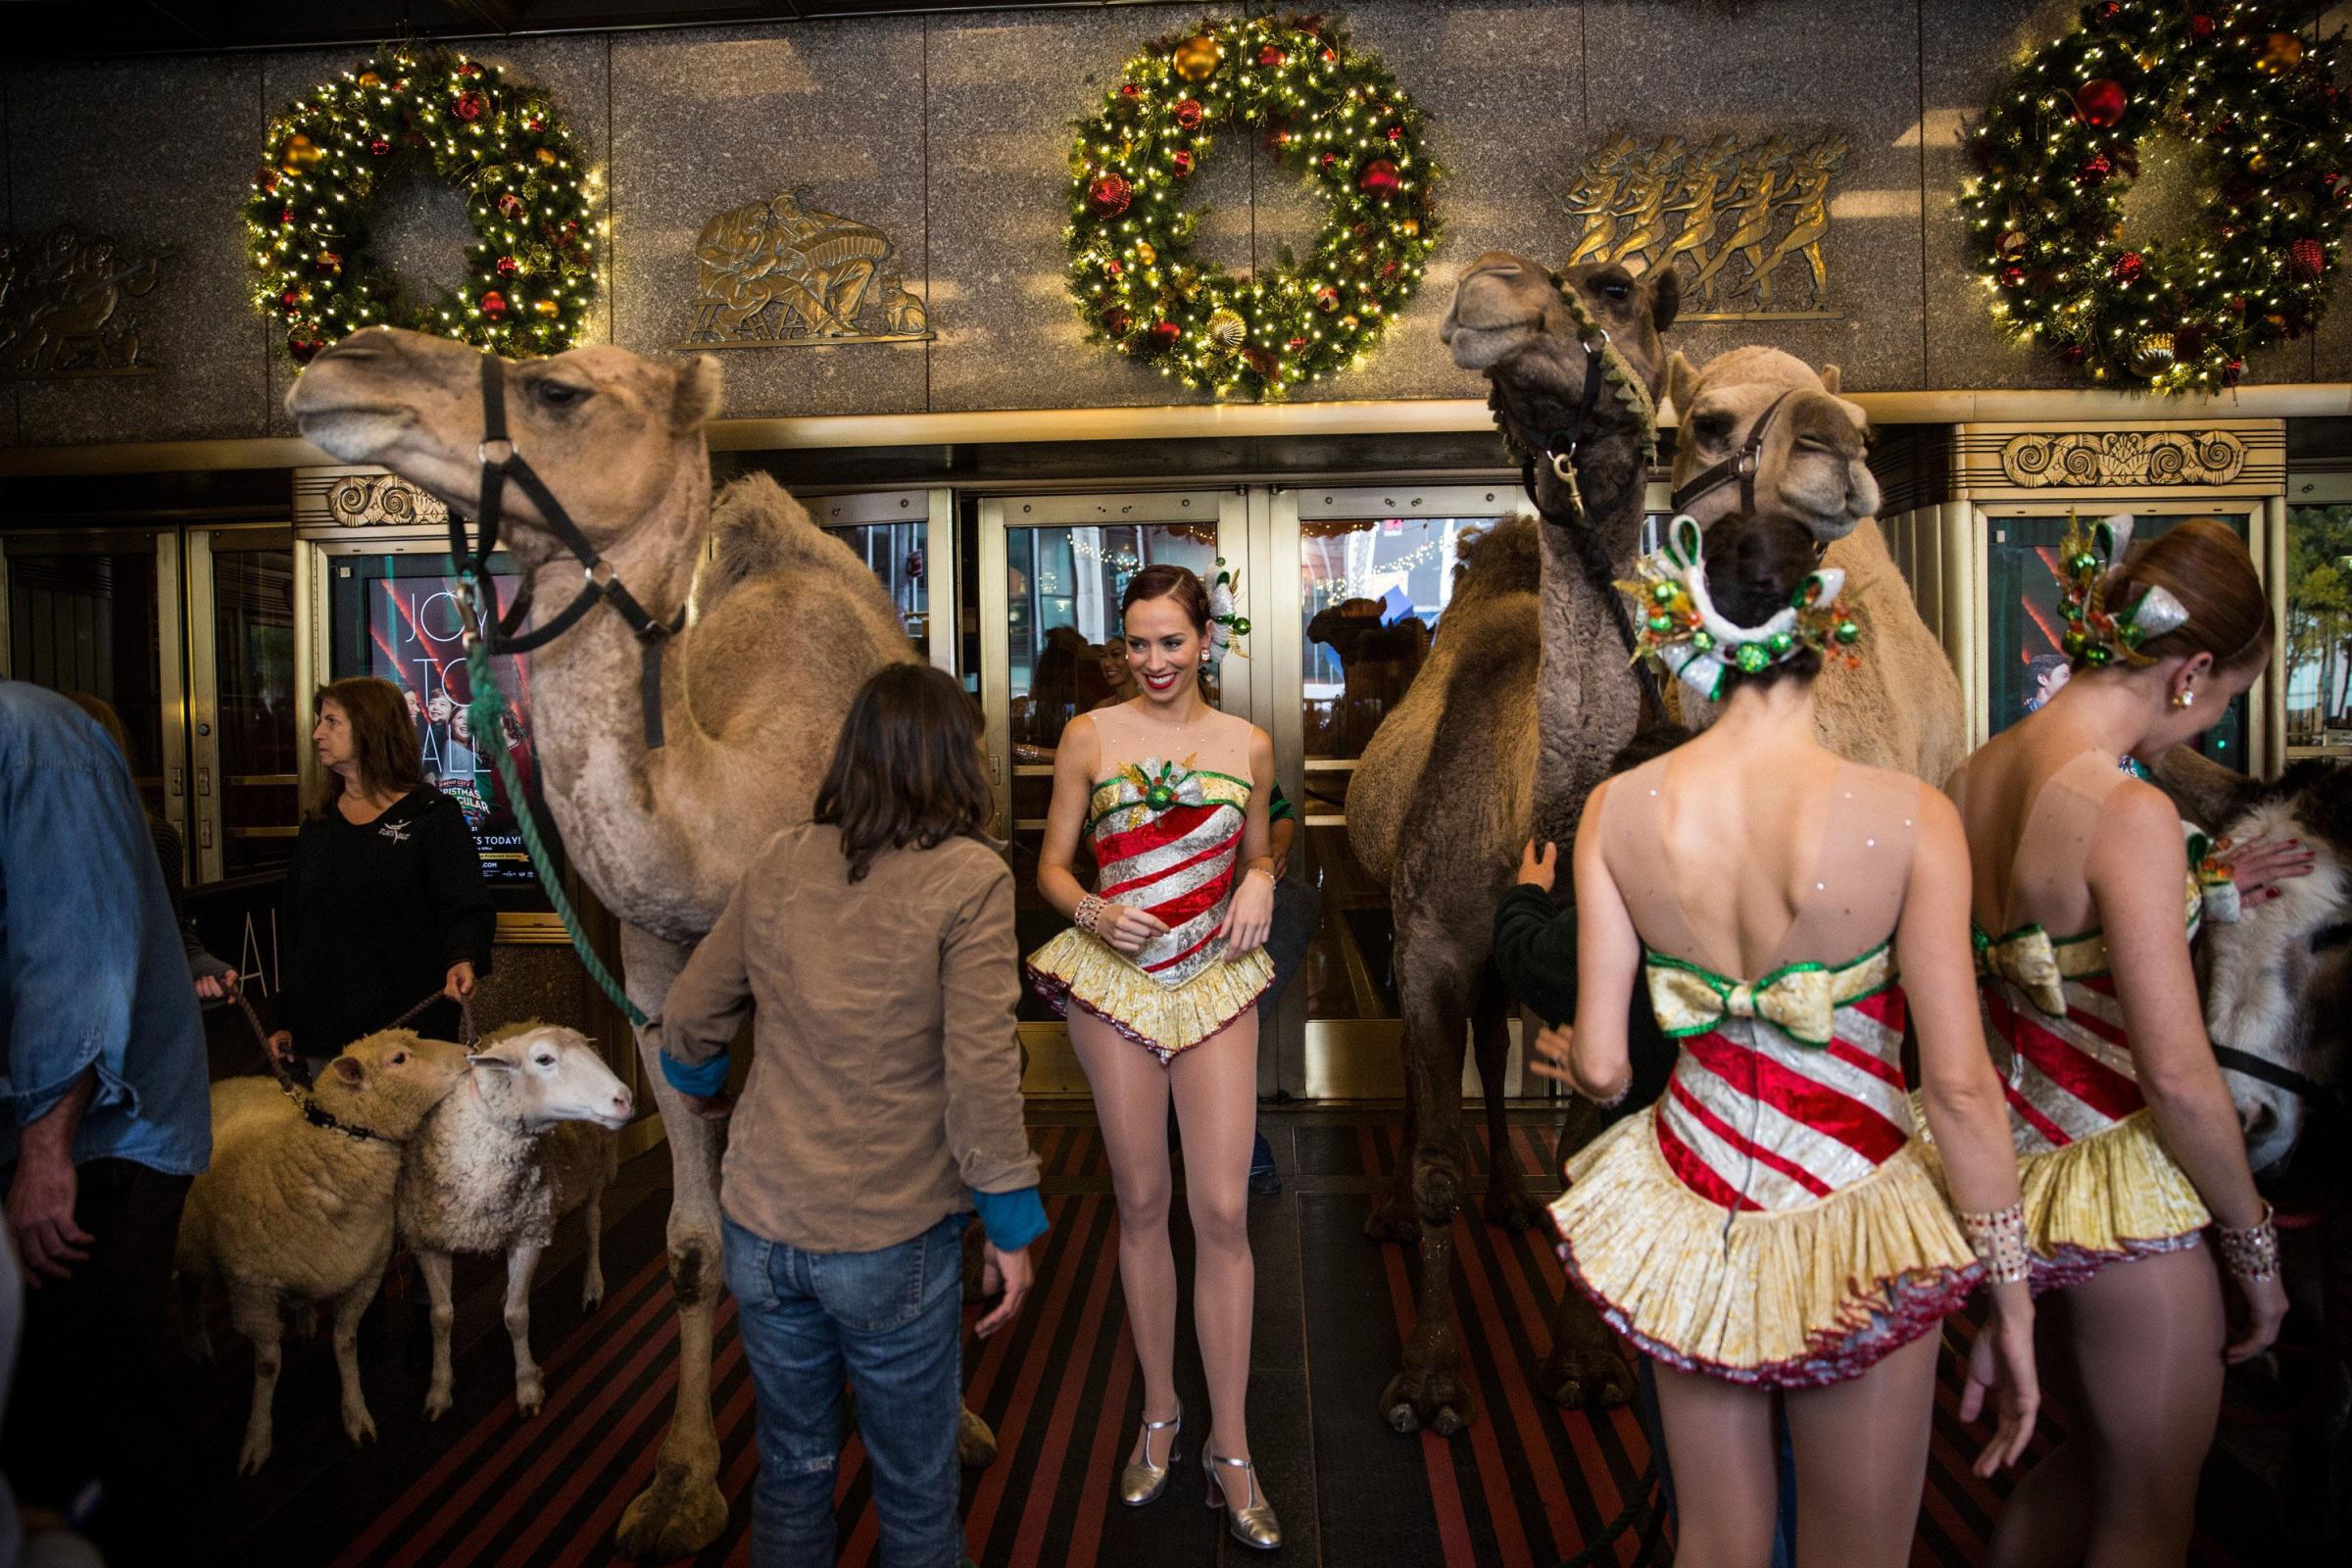 Members of the Radio City Rockettes prepare to pose for photos with three camels, a donkey and two sheep as a promotional stunt to publicize their upcoming Christmas Special on Oct. 28, 2014 in New York City.